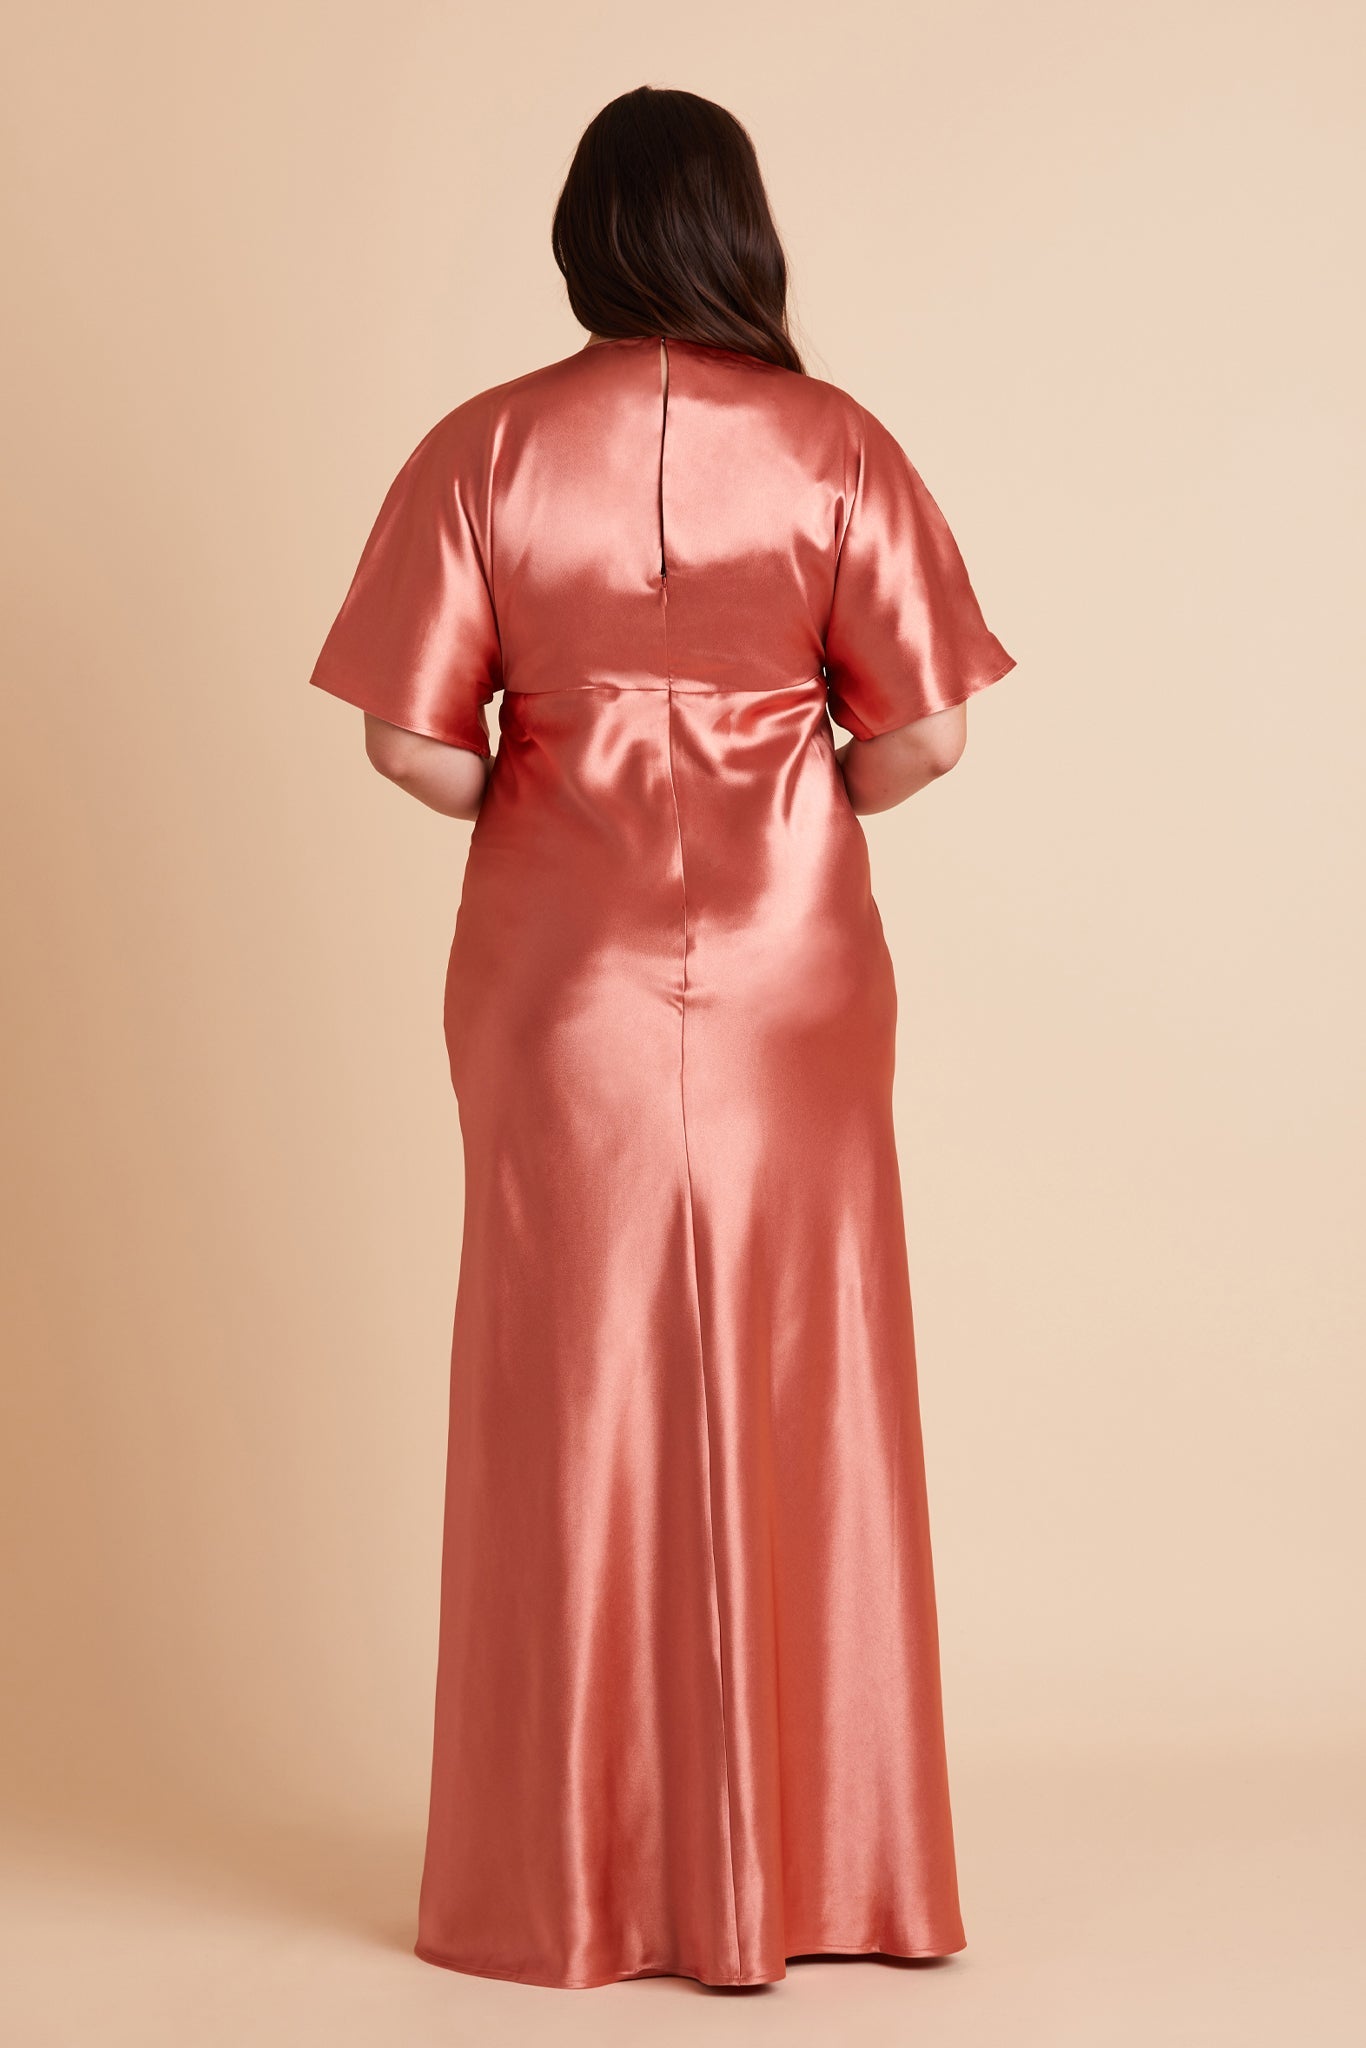 Jesse plus size bridesmaid dress with slit in terracotta satin by Birdy Grey, back view